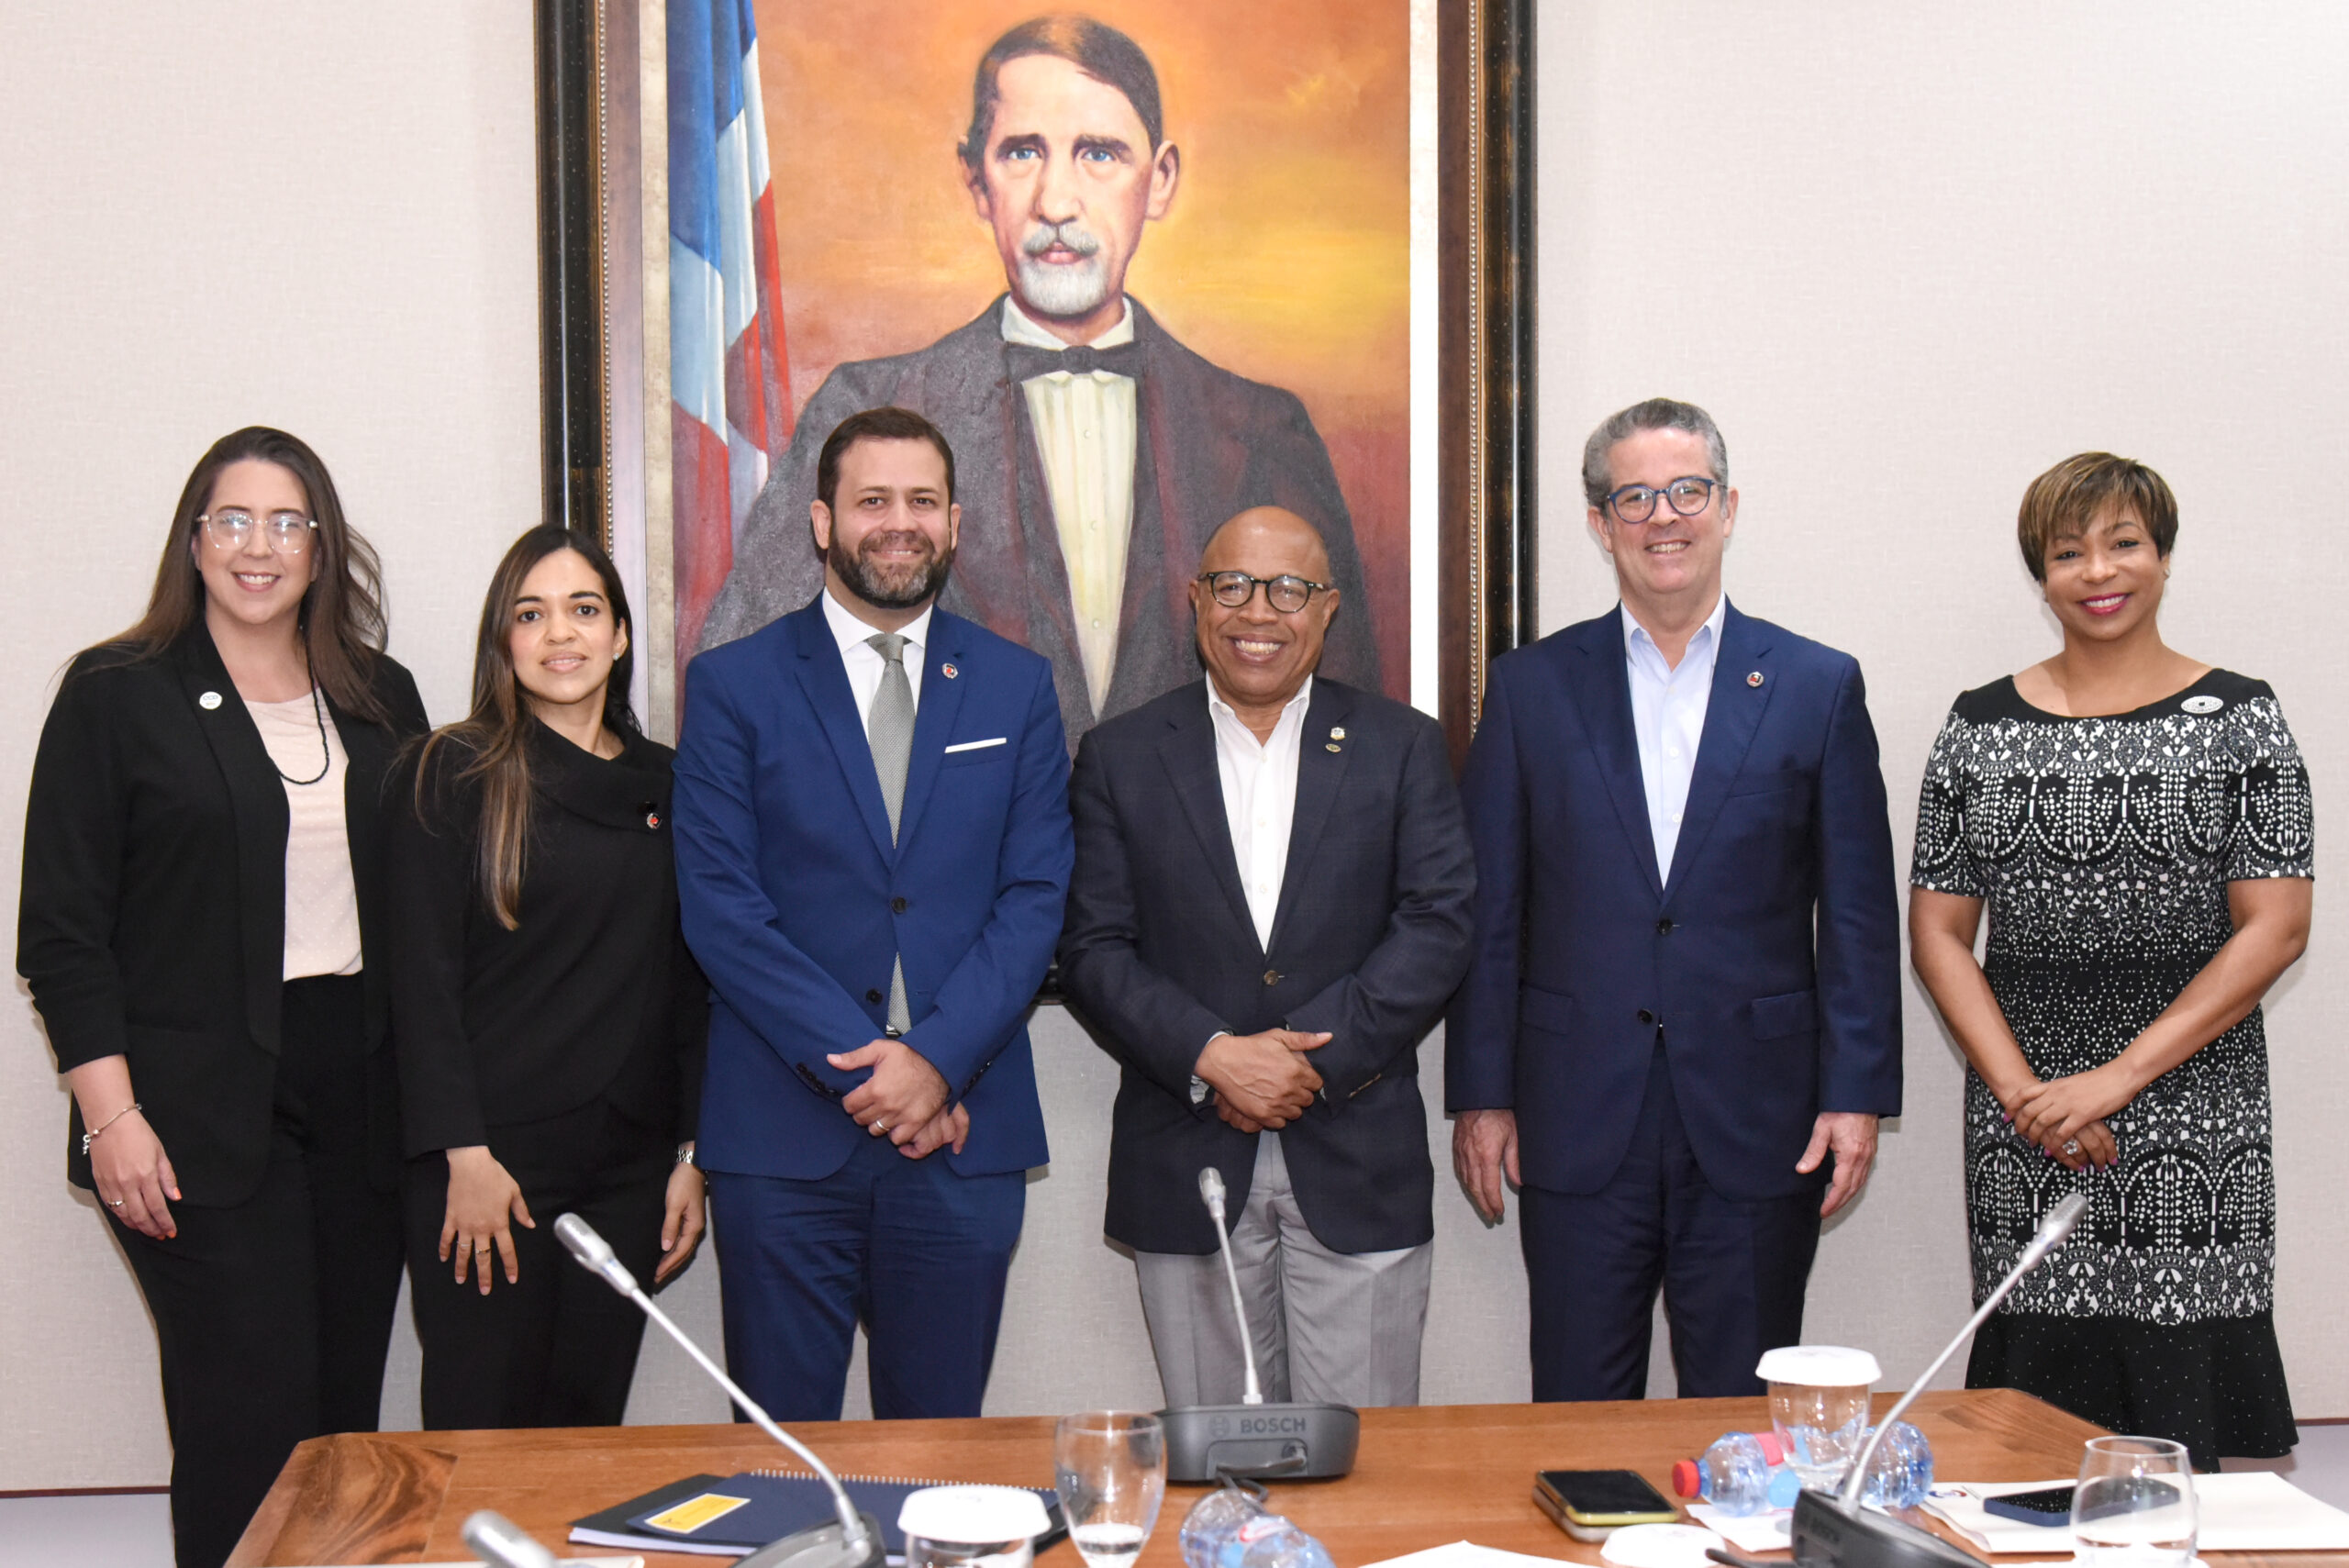 The President of the Dominican Republic's Chamber of Deputies, Alfredo Pacheco, met with the executives of the Call Center and BPO Cluster and the Dominican Free Zone Association (Adozona)